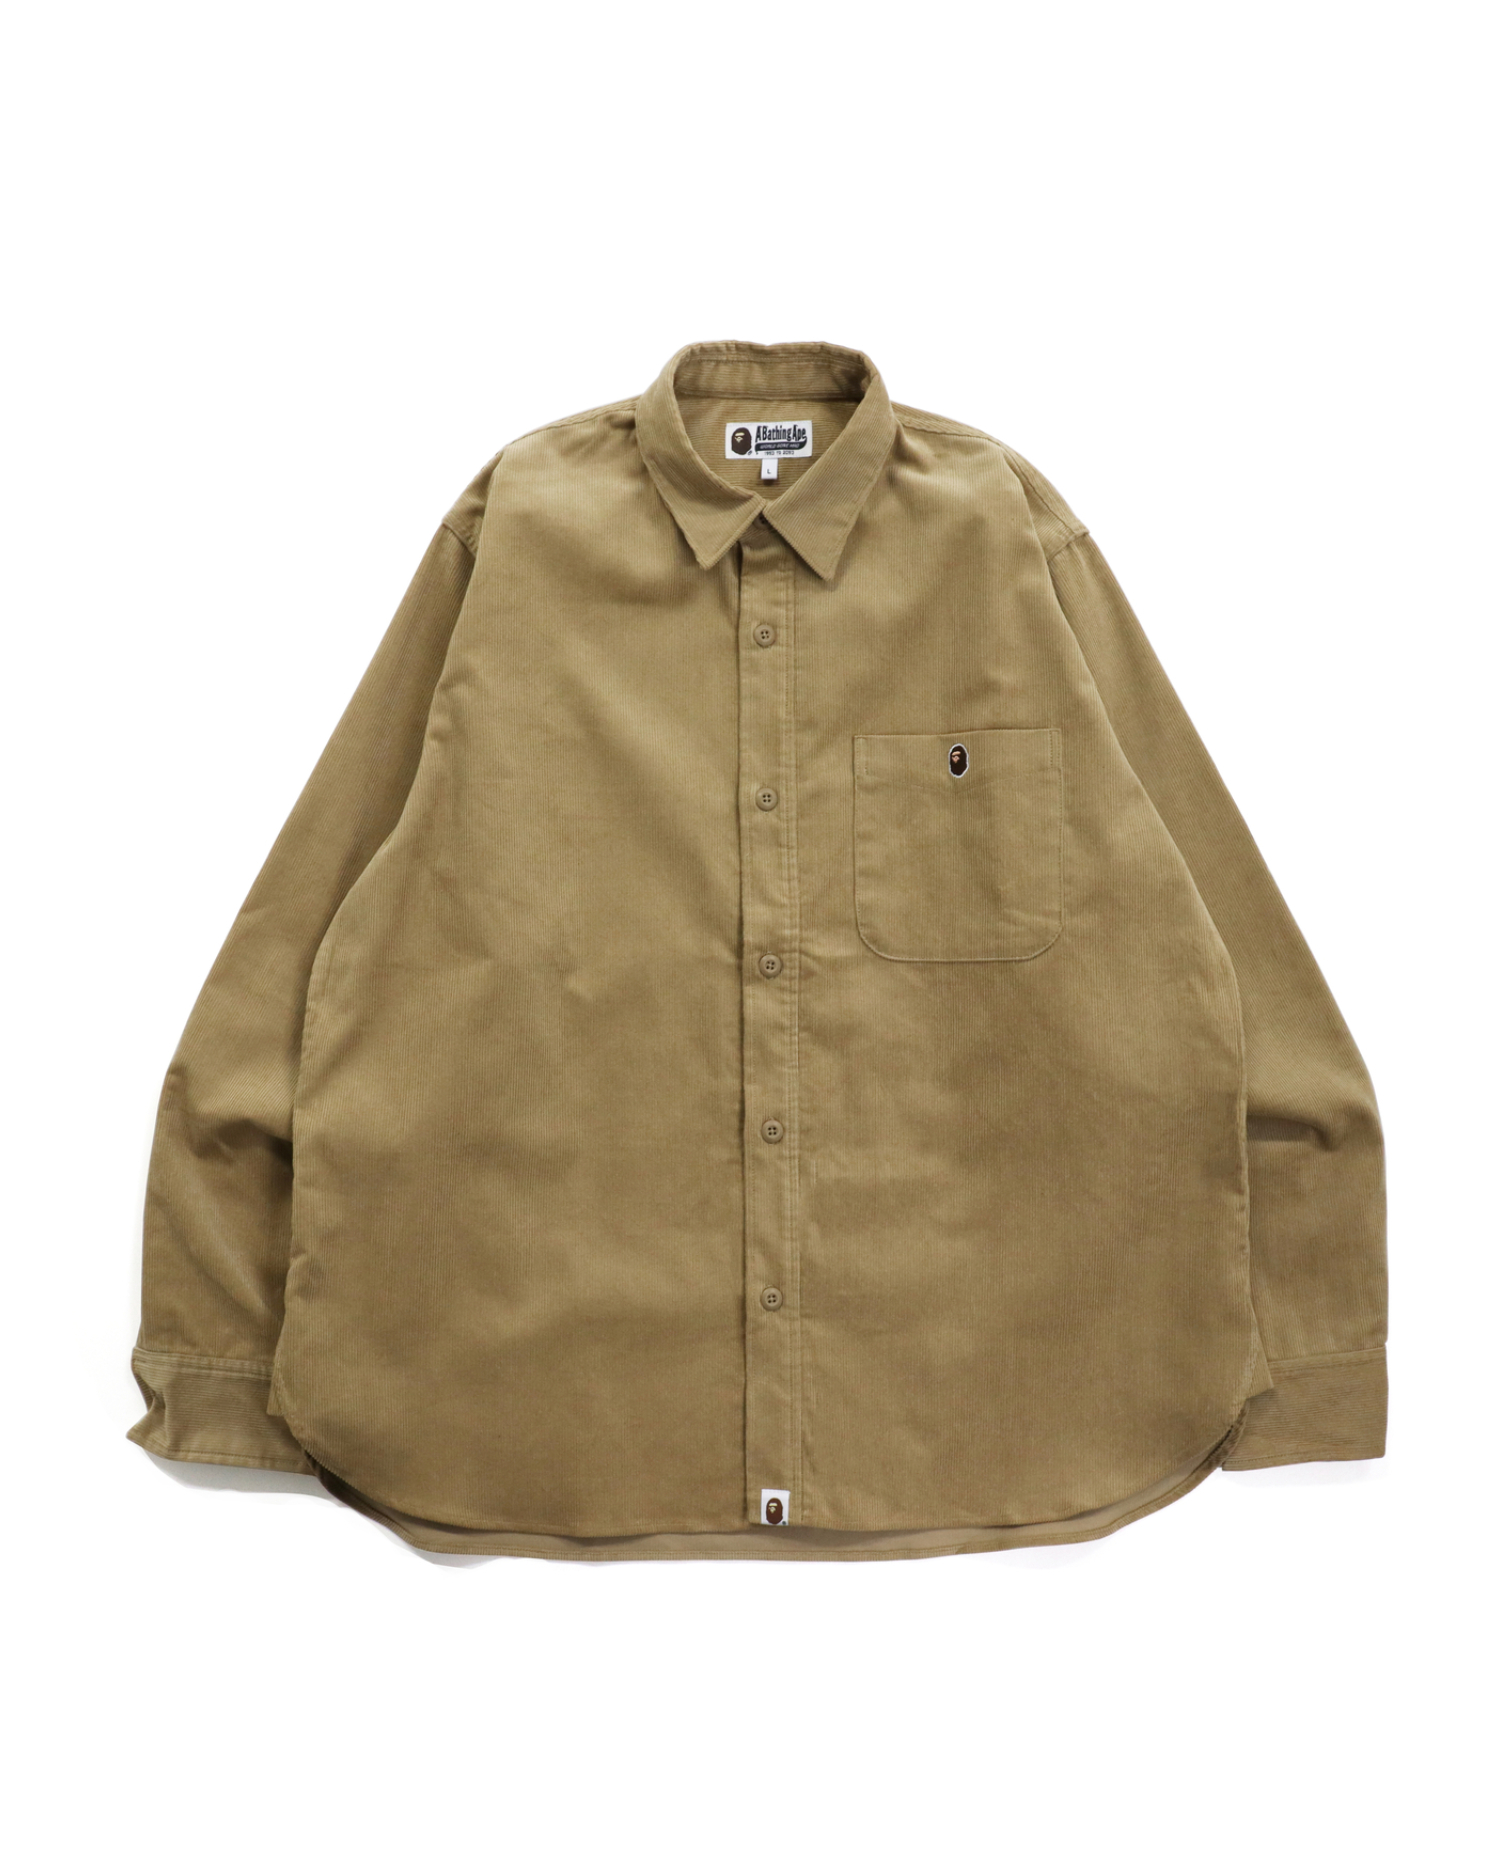 Shop Ape Head One Point Corduroy Relaxed Fit Work Shirt Online | BAPE